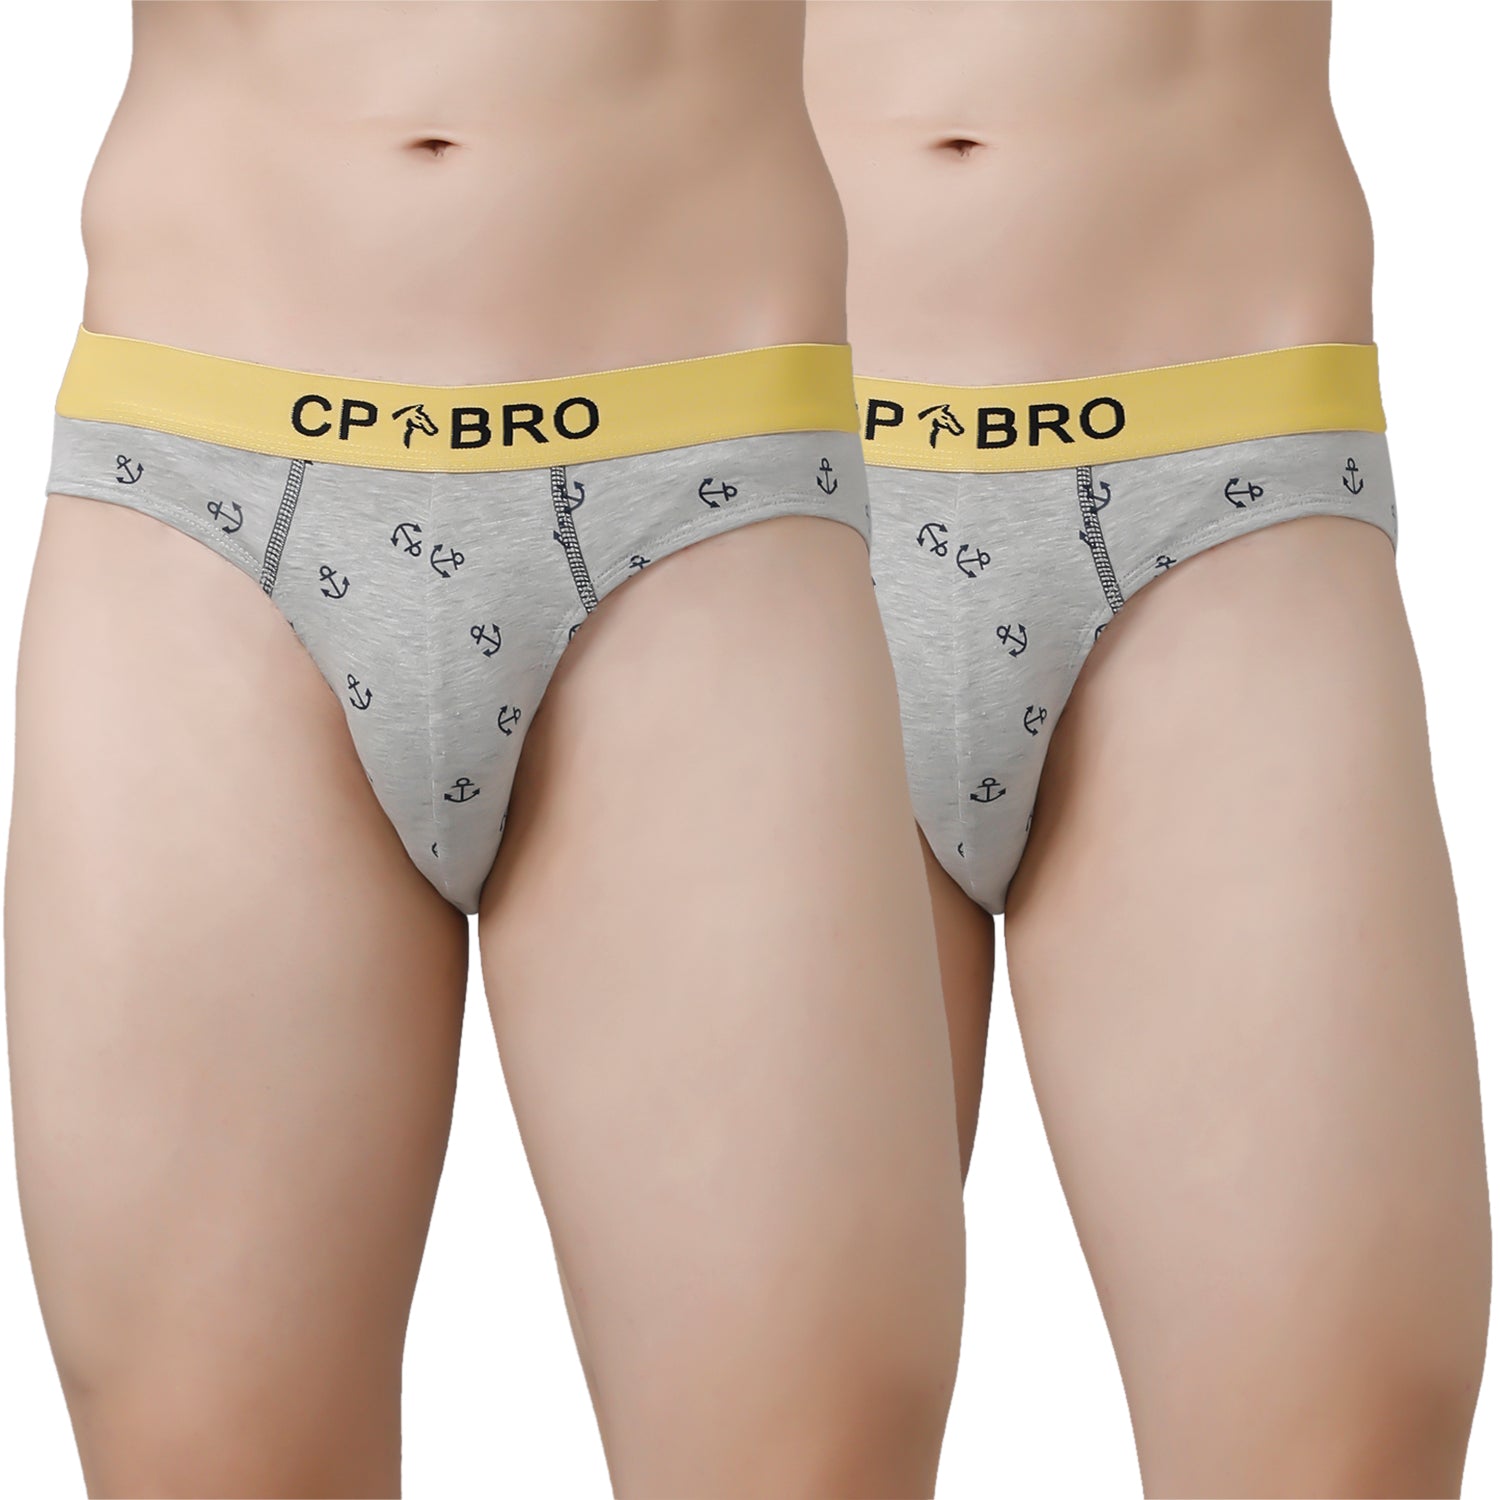 Men's blue briefs with anchors, low-waist underpants, tailored fit